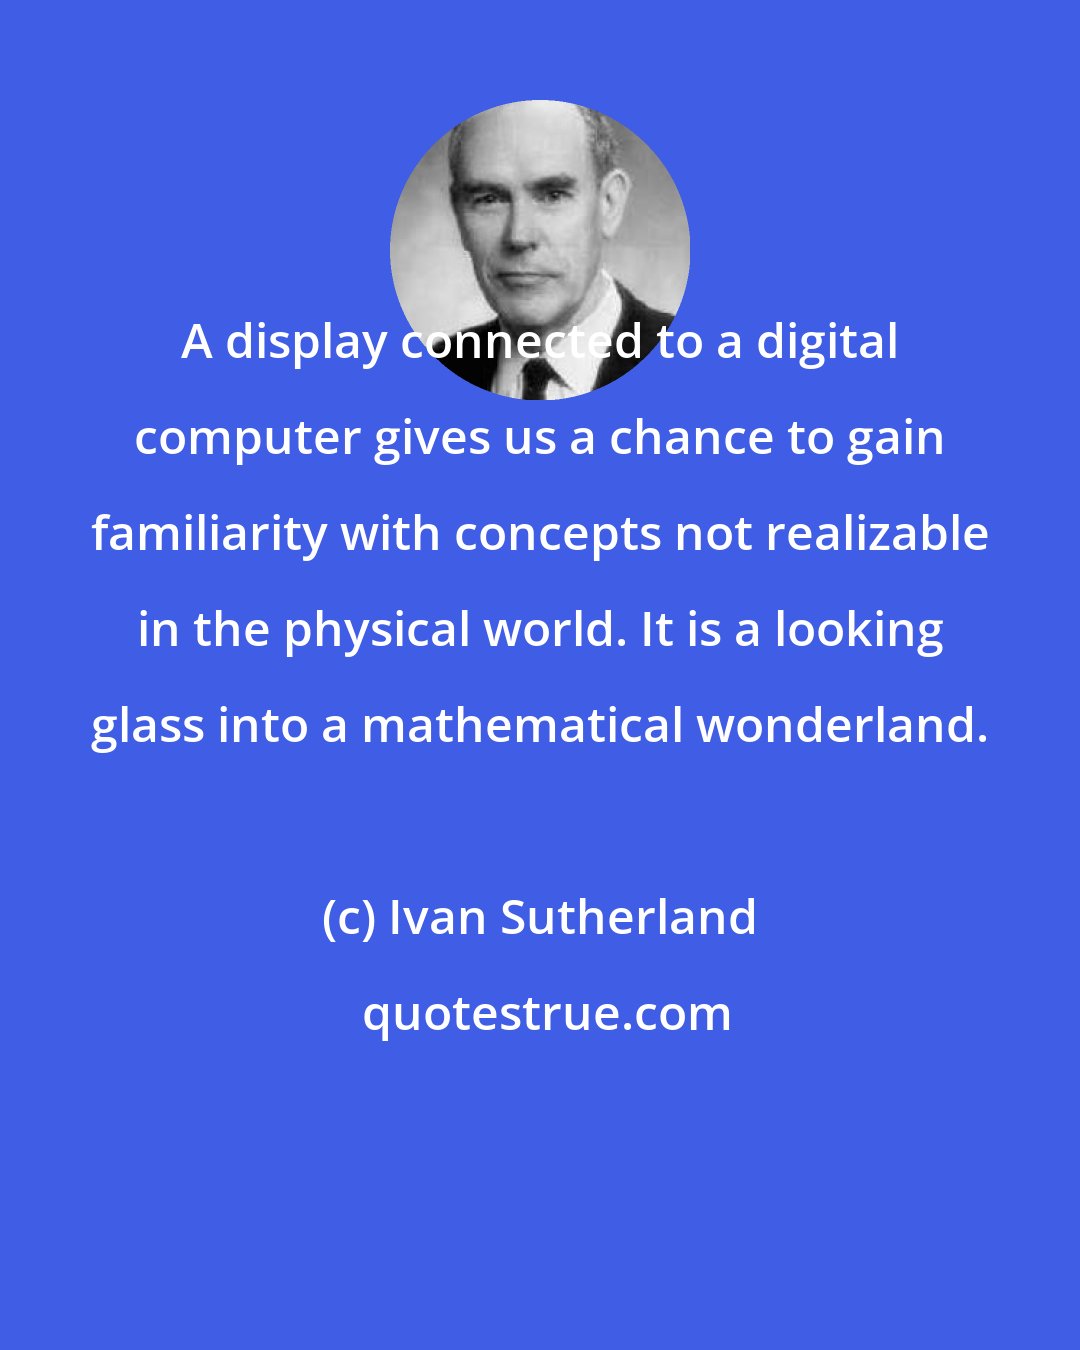 Ivan Sutherland: A display connected to a digital computer gives us a chance to gain familiarity with concepts not realizable in the physical world. It is a looking glass into a mathematical wonderland.